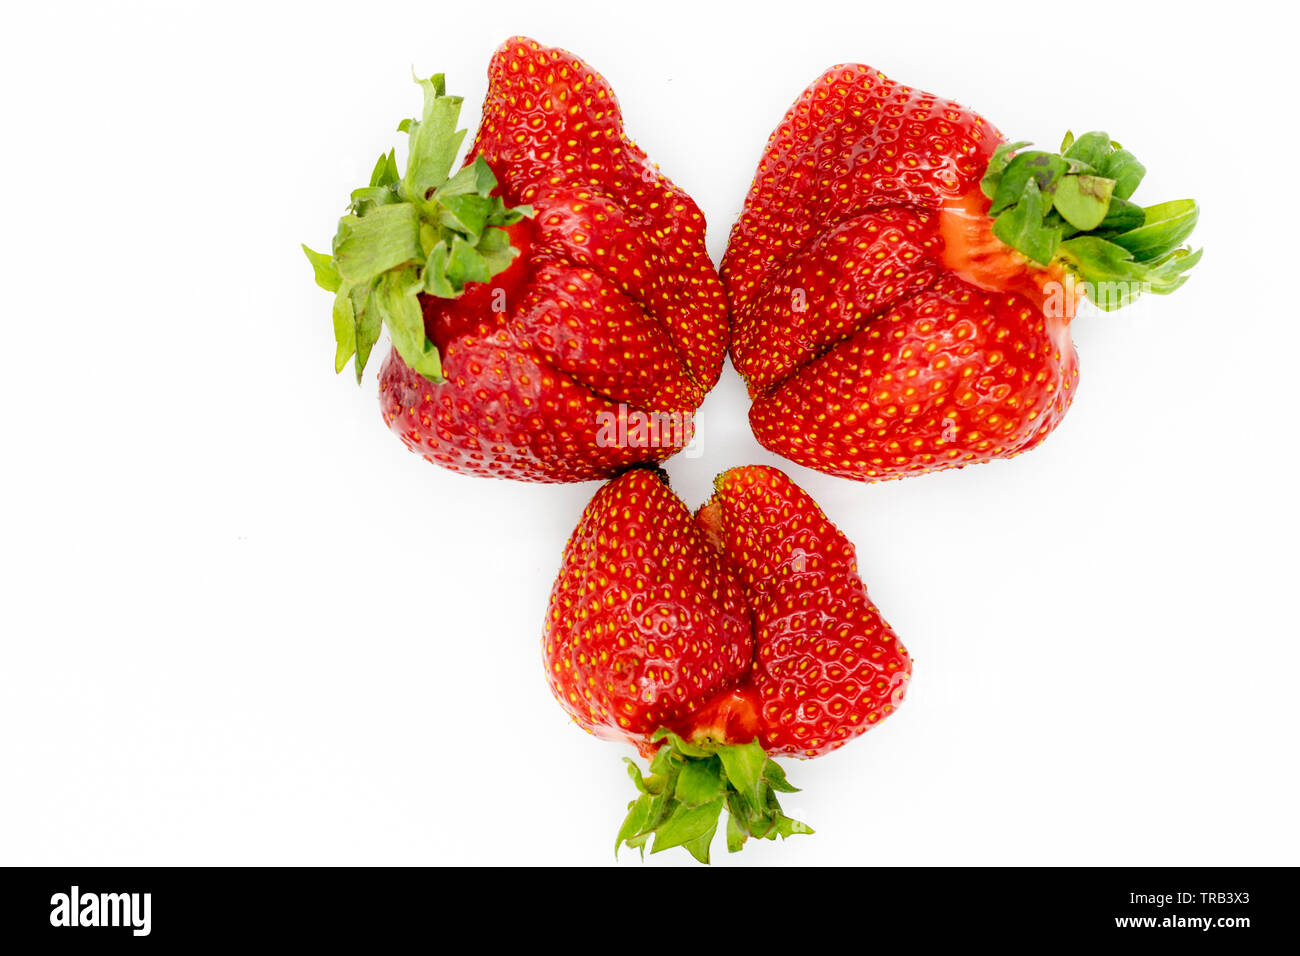 Strawberry. Imperfect Fresh Organic Fruit Closeup. Healthy Green Vegetarian Nutrition. Whole Vitamin Breakfast Ingredient. Ugly Non Ideal but Deliciou Stock Photo